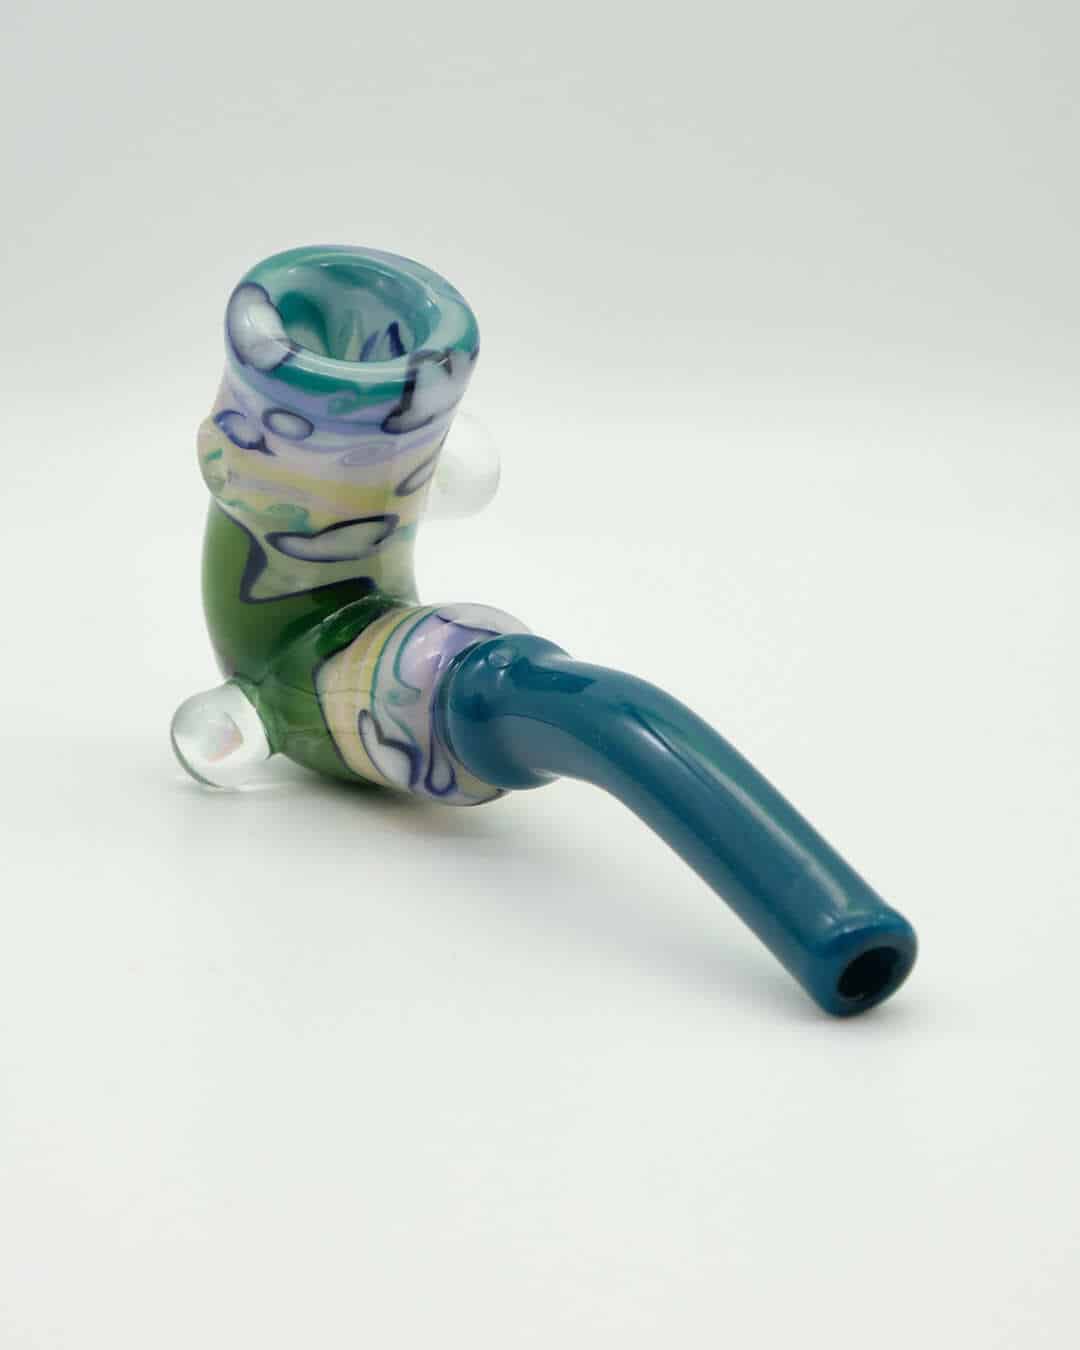 luxurious design of the Sherlock Pipe by Gnarla Carla